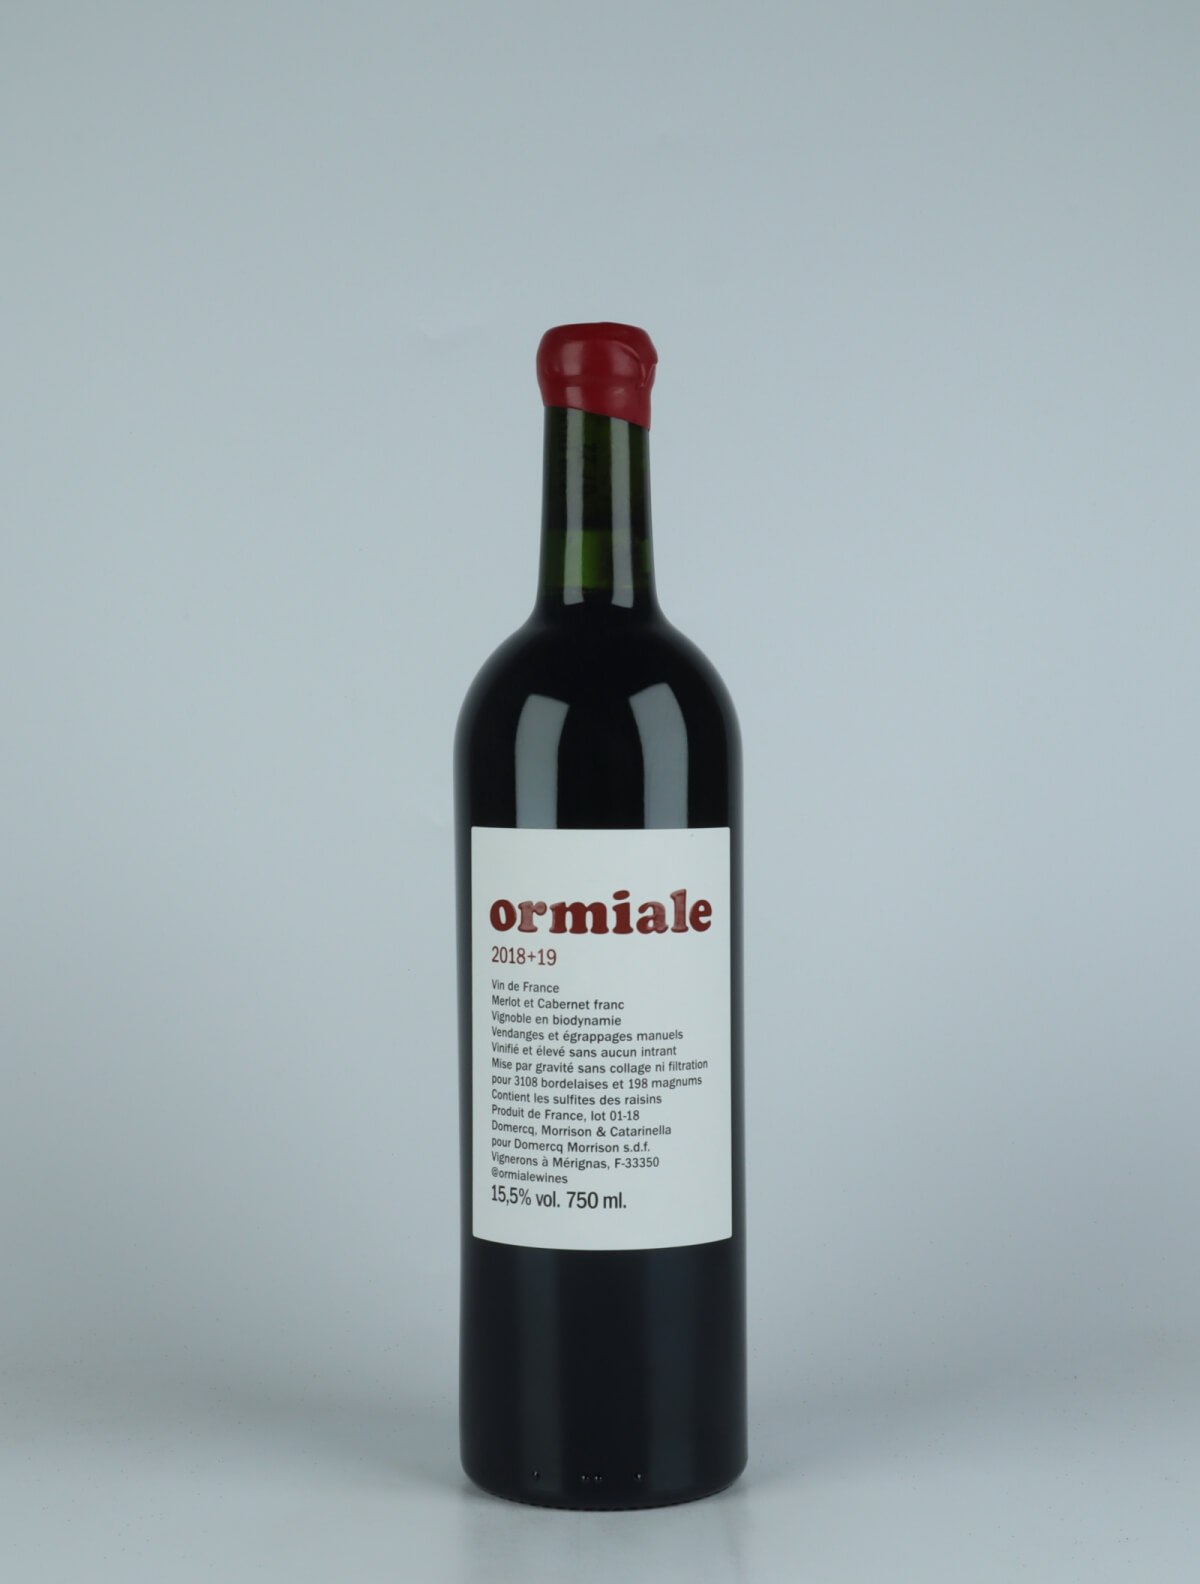 A bottle N.V. Ormiale (18+19) Red wine from Ormiale, Bordeaux in France